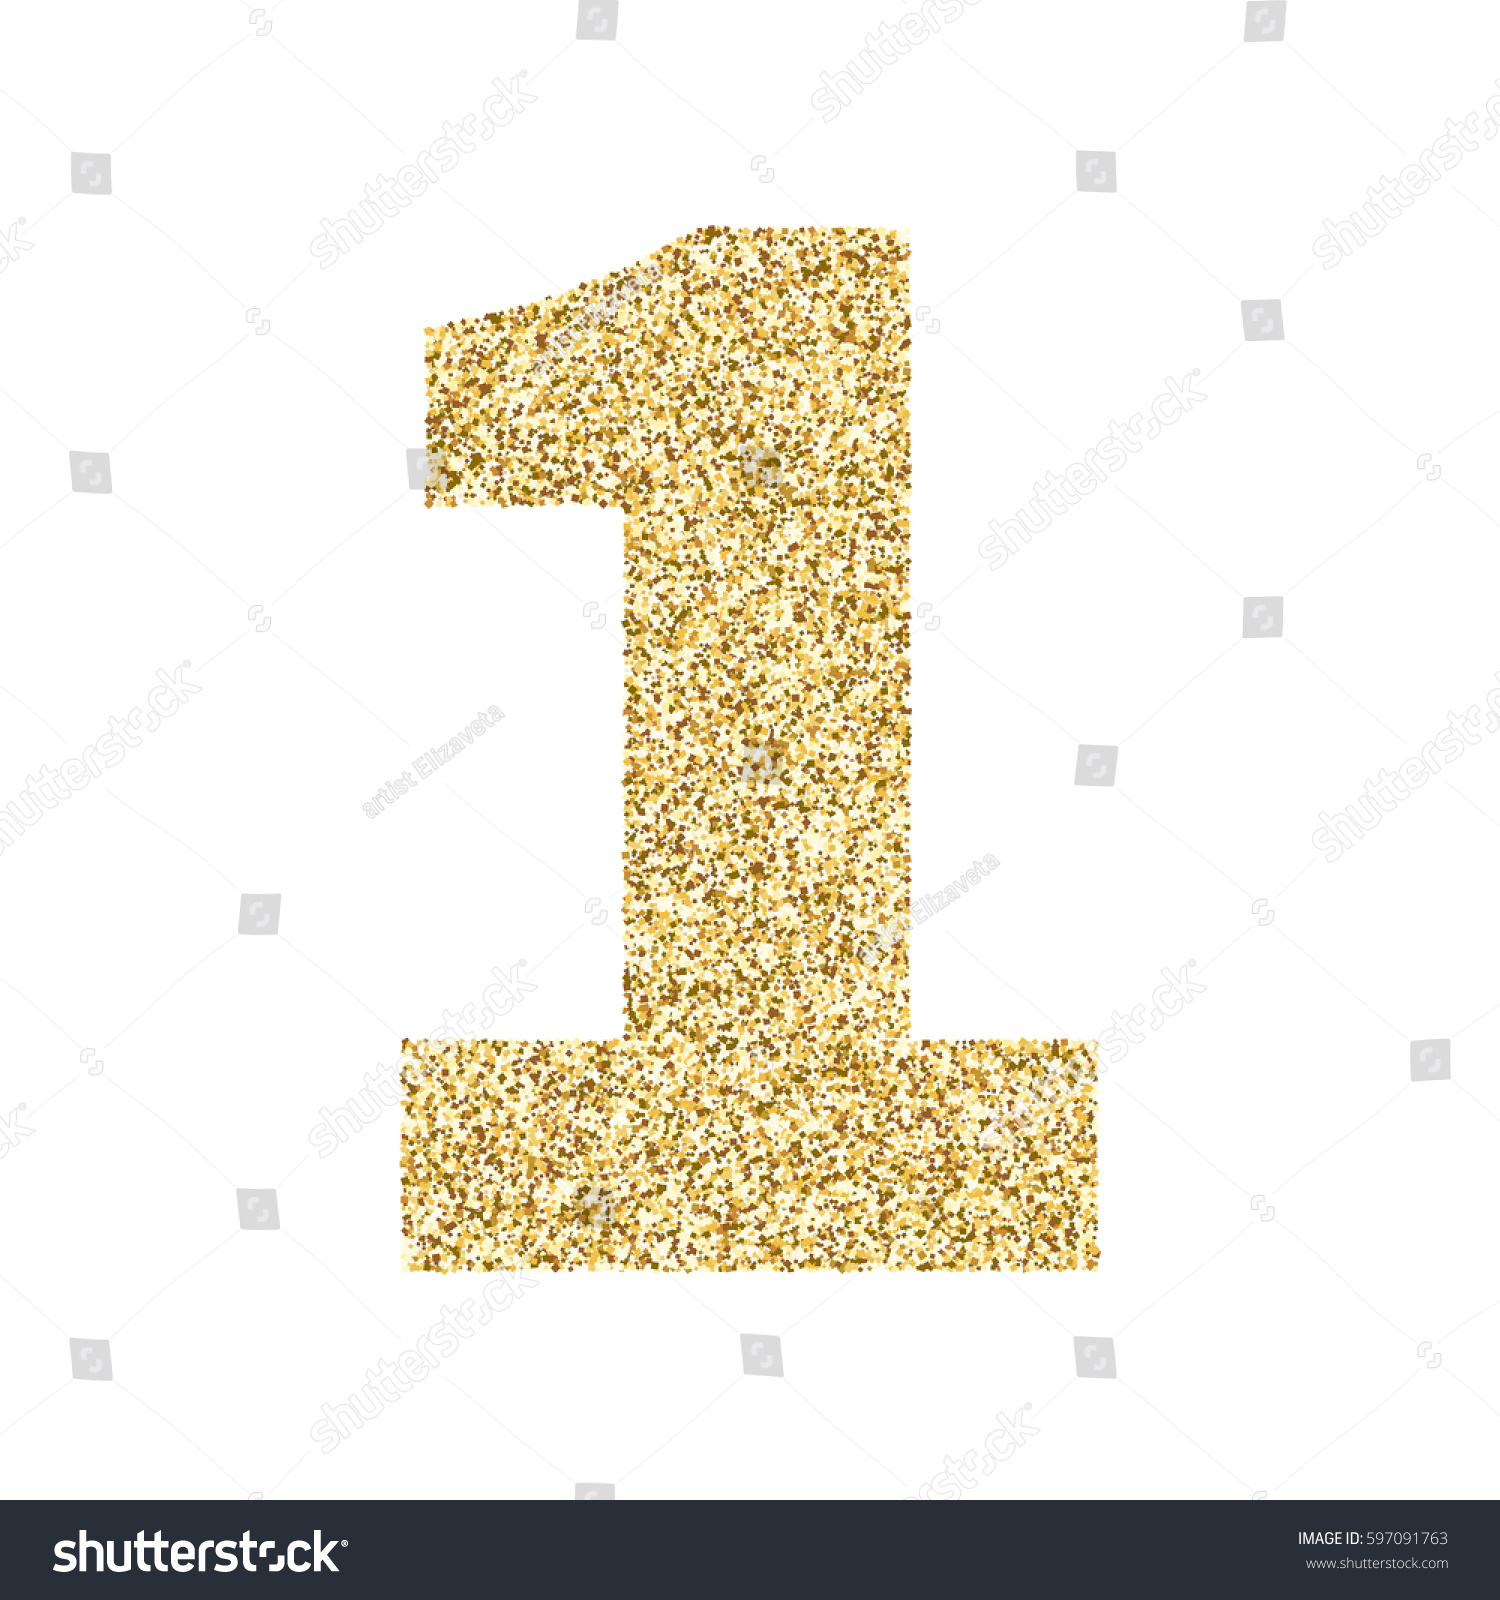 stock vector gold glitter alphabet number ideal for wedding invitations posters greeting cards banners 597091763